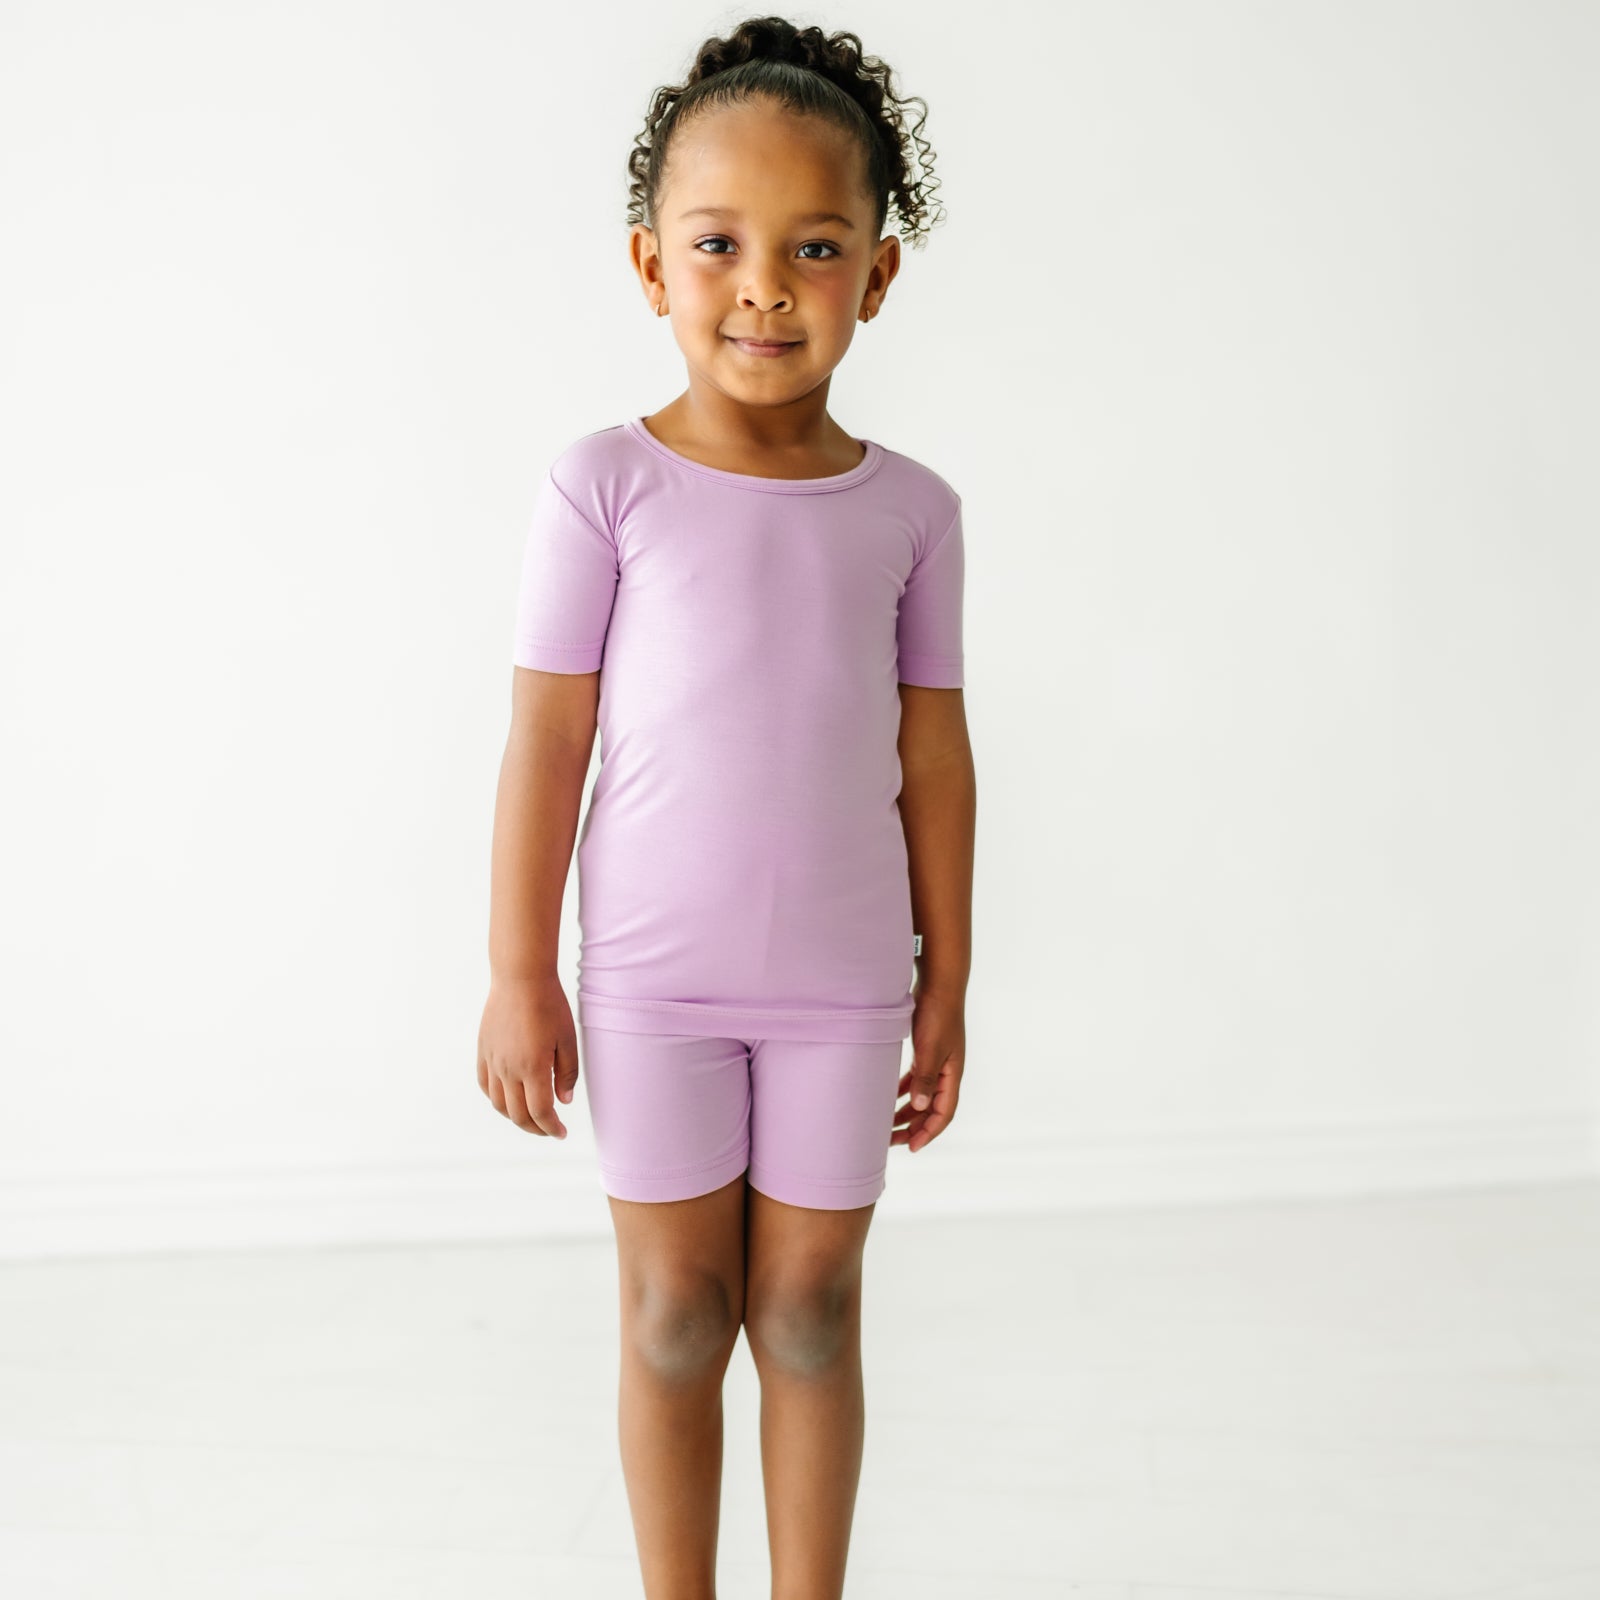 Child wearing a Light Orchid two piece shorts and short sleeve pajama set